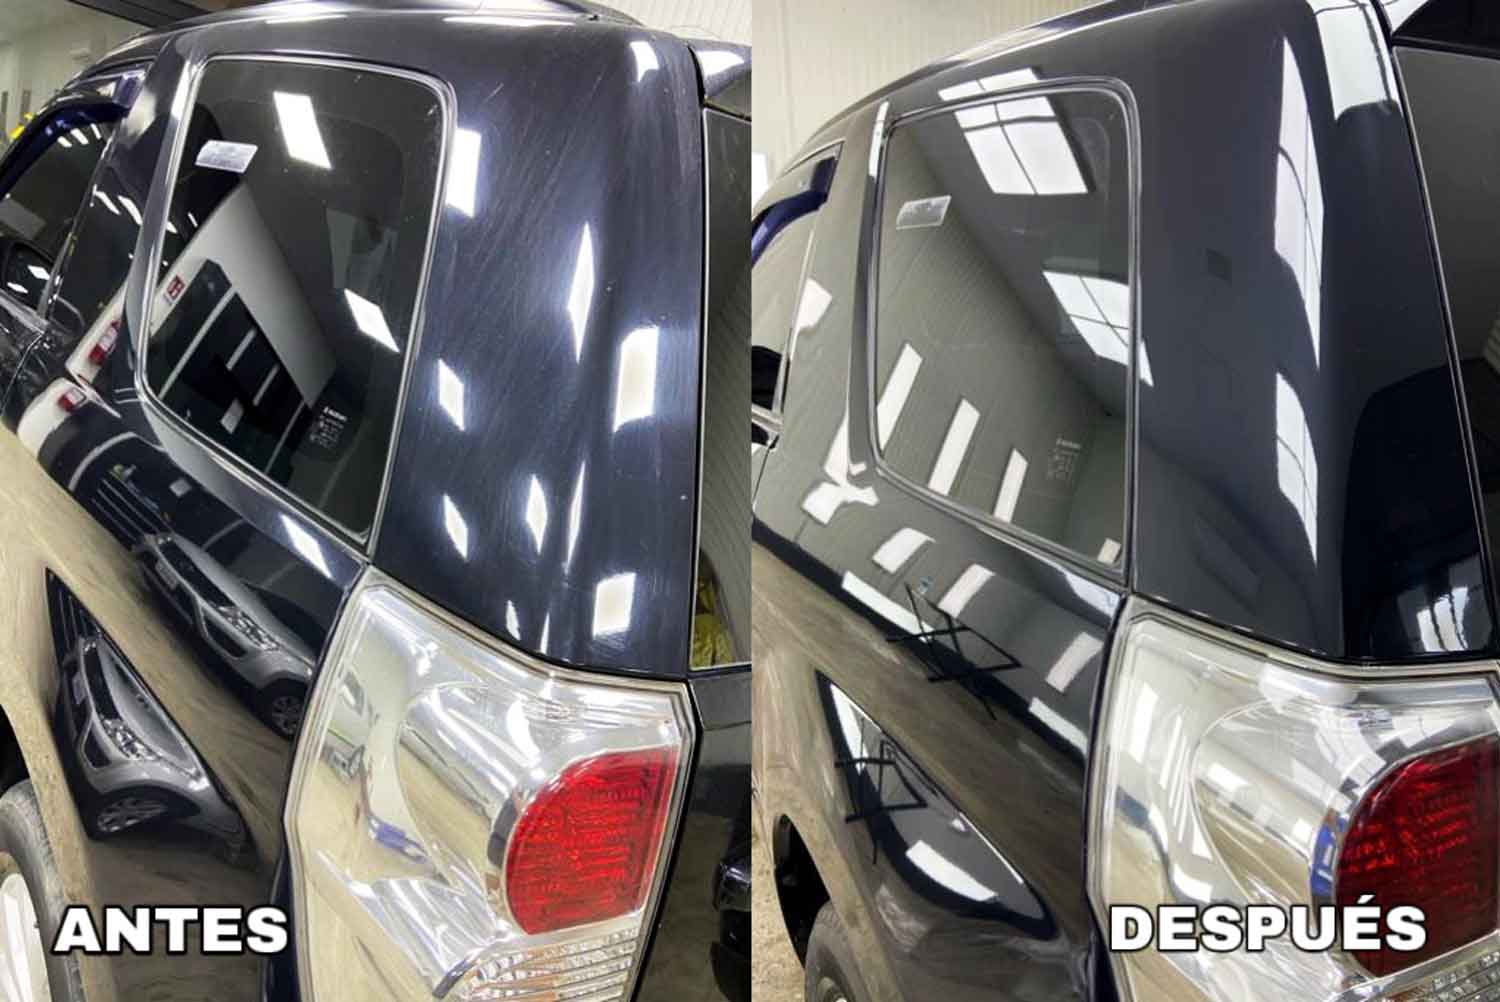 Black SUV before and after RestorFX product application